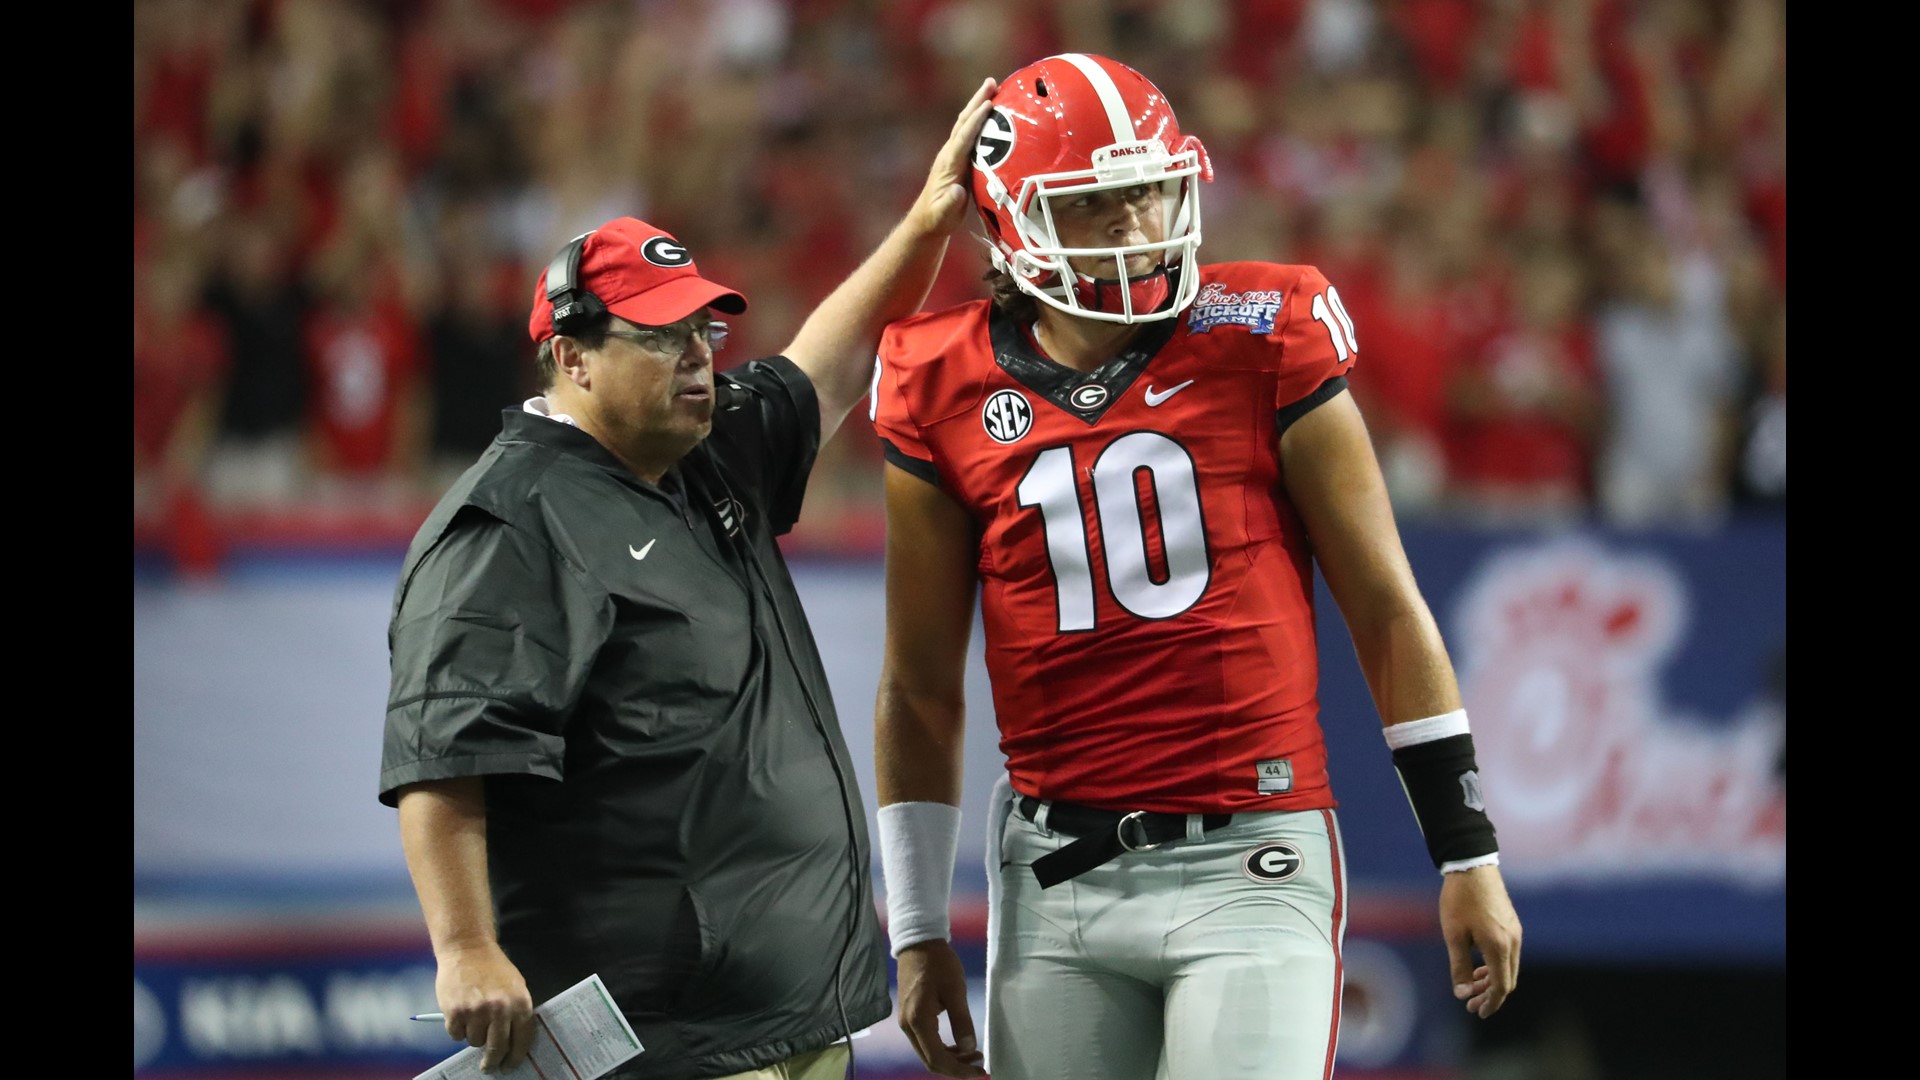 Chaney worked extensively with three elite QBs during his his time at Georgia--Jacob Eason, Jake Fromm and Justin Fields.